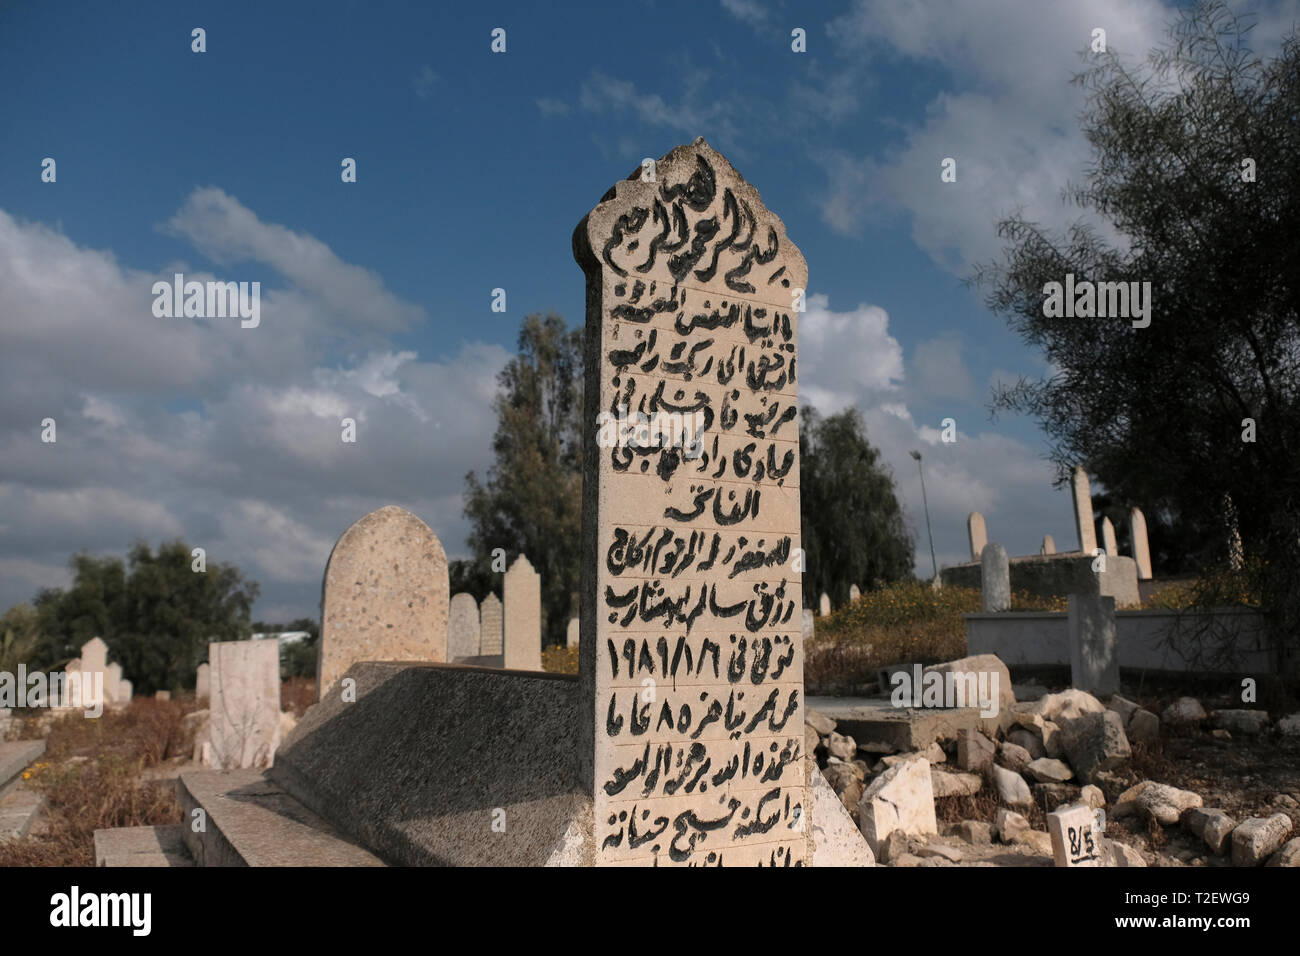 Graves at a Muslim cemetery in the outskirts of Rahat a predominantly Bedouin city in the Negev desert Southern District of Israel. Rahat is the largest Bedouin city in the world, and the only one in Israel to have city status. Stock Photo